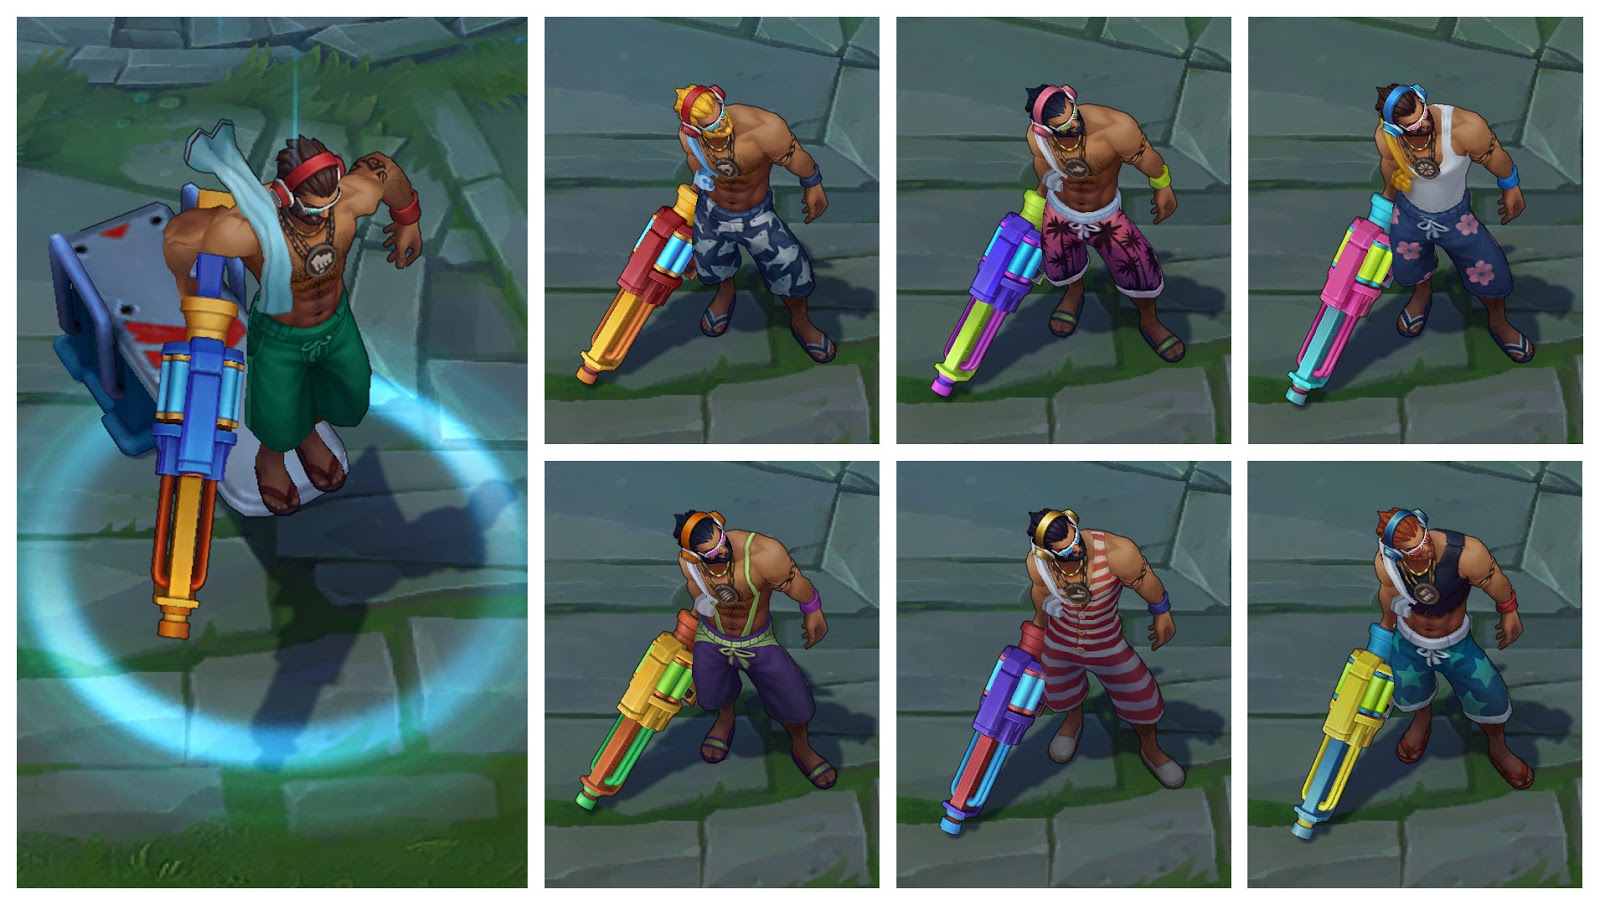 Pool Party Graves chroma skin pack for league of legends ingame picture